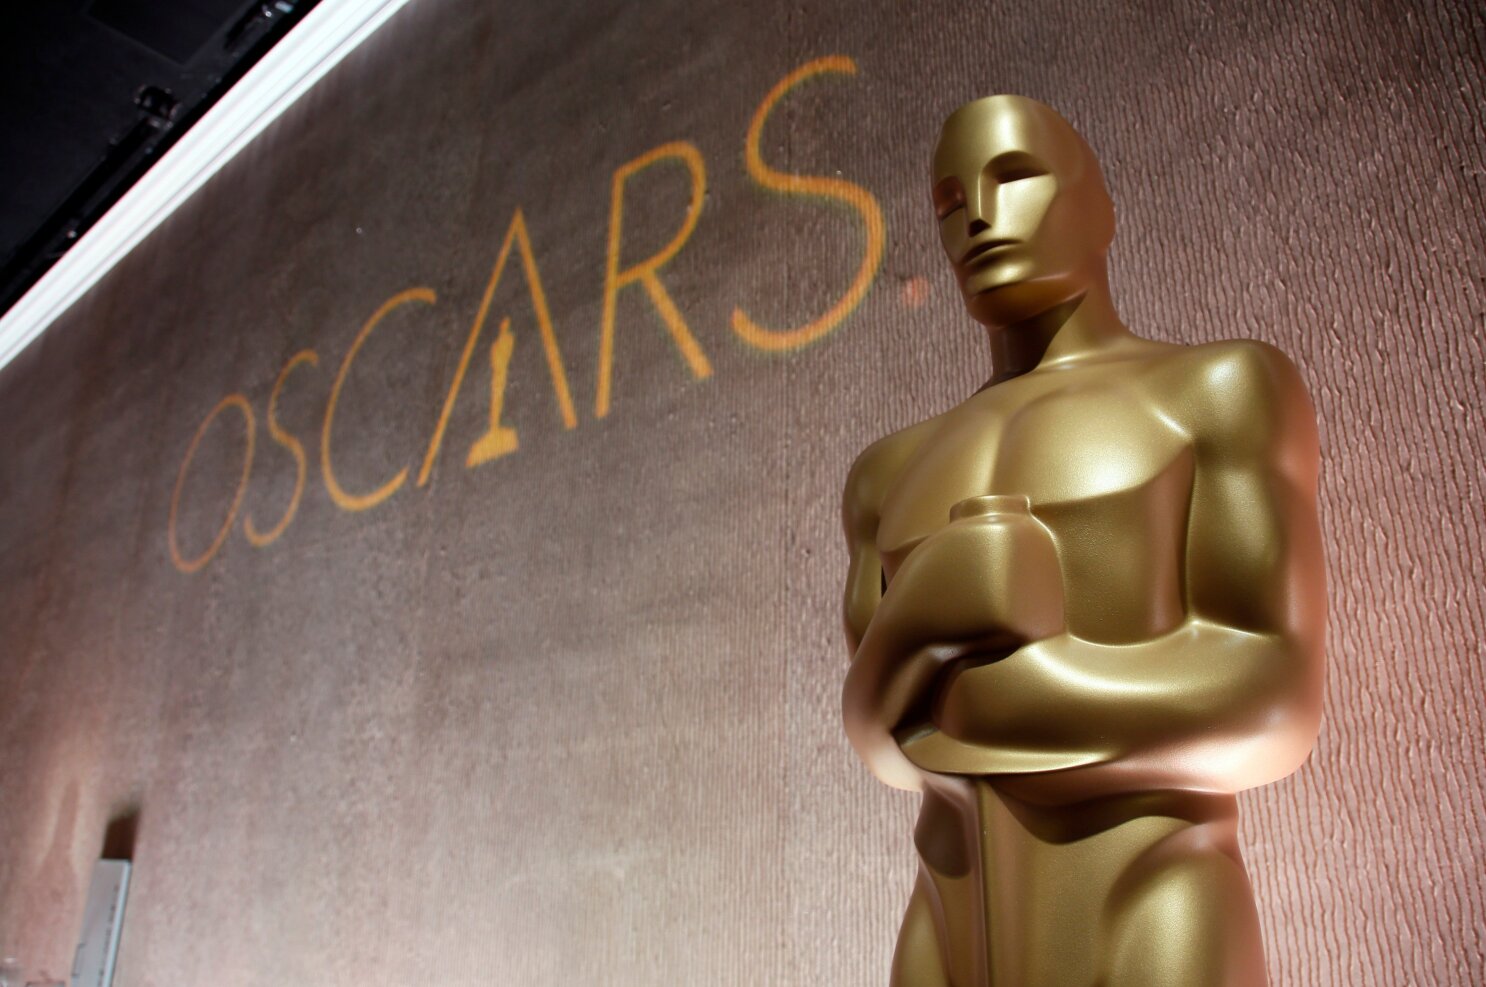 Oscar nominations 2021: Mank tops the full list of nominees with